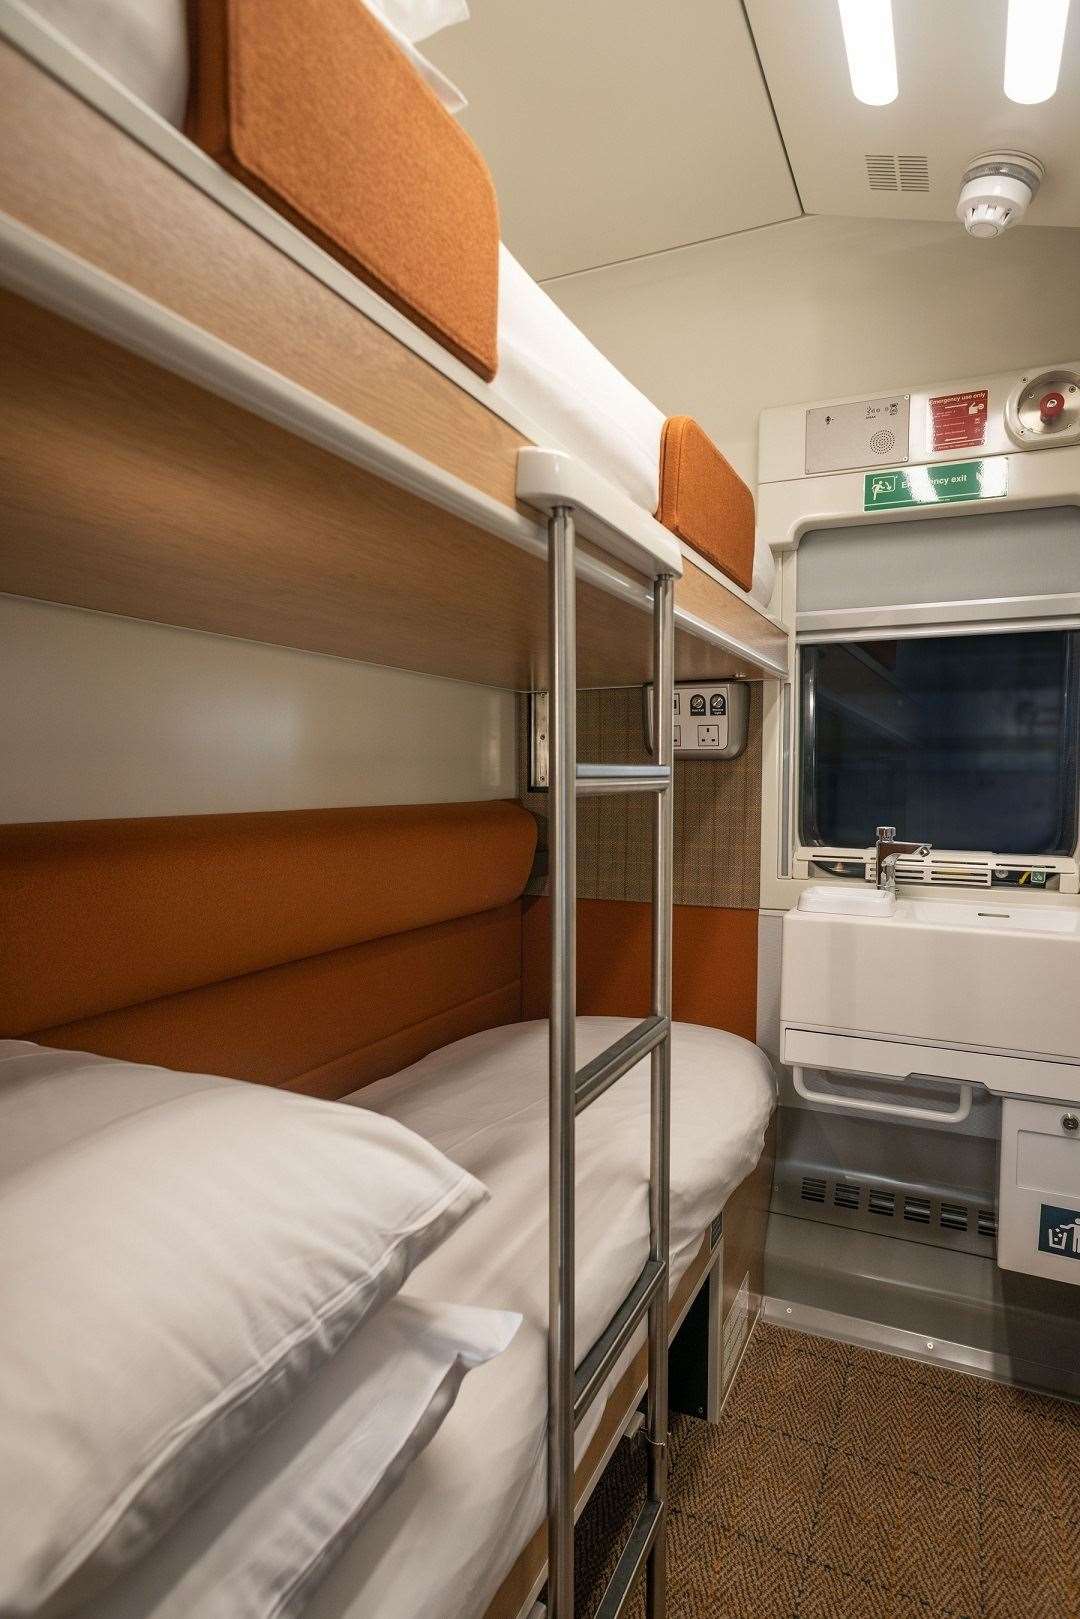 Caledonian Sleeper gives first look inside new trains for Inverness to